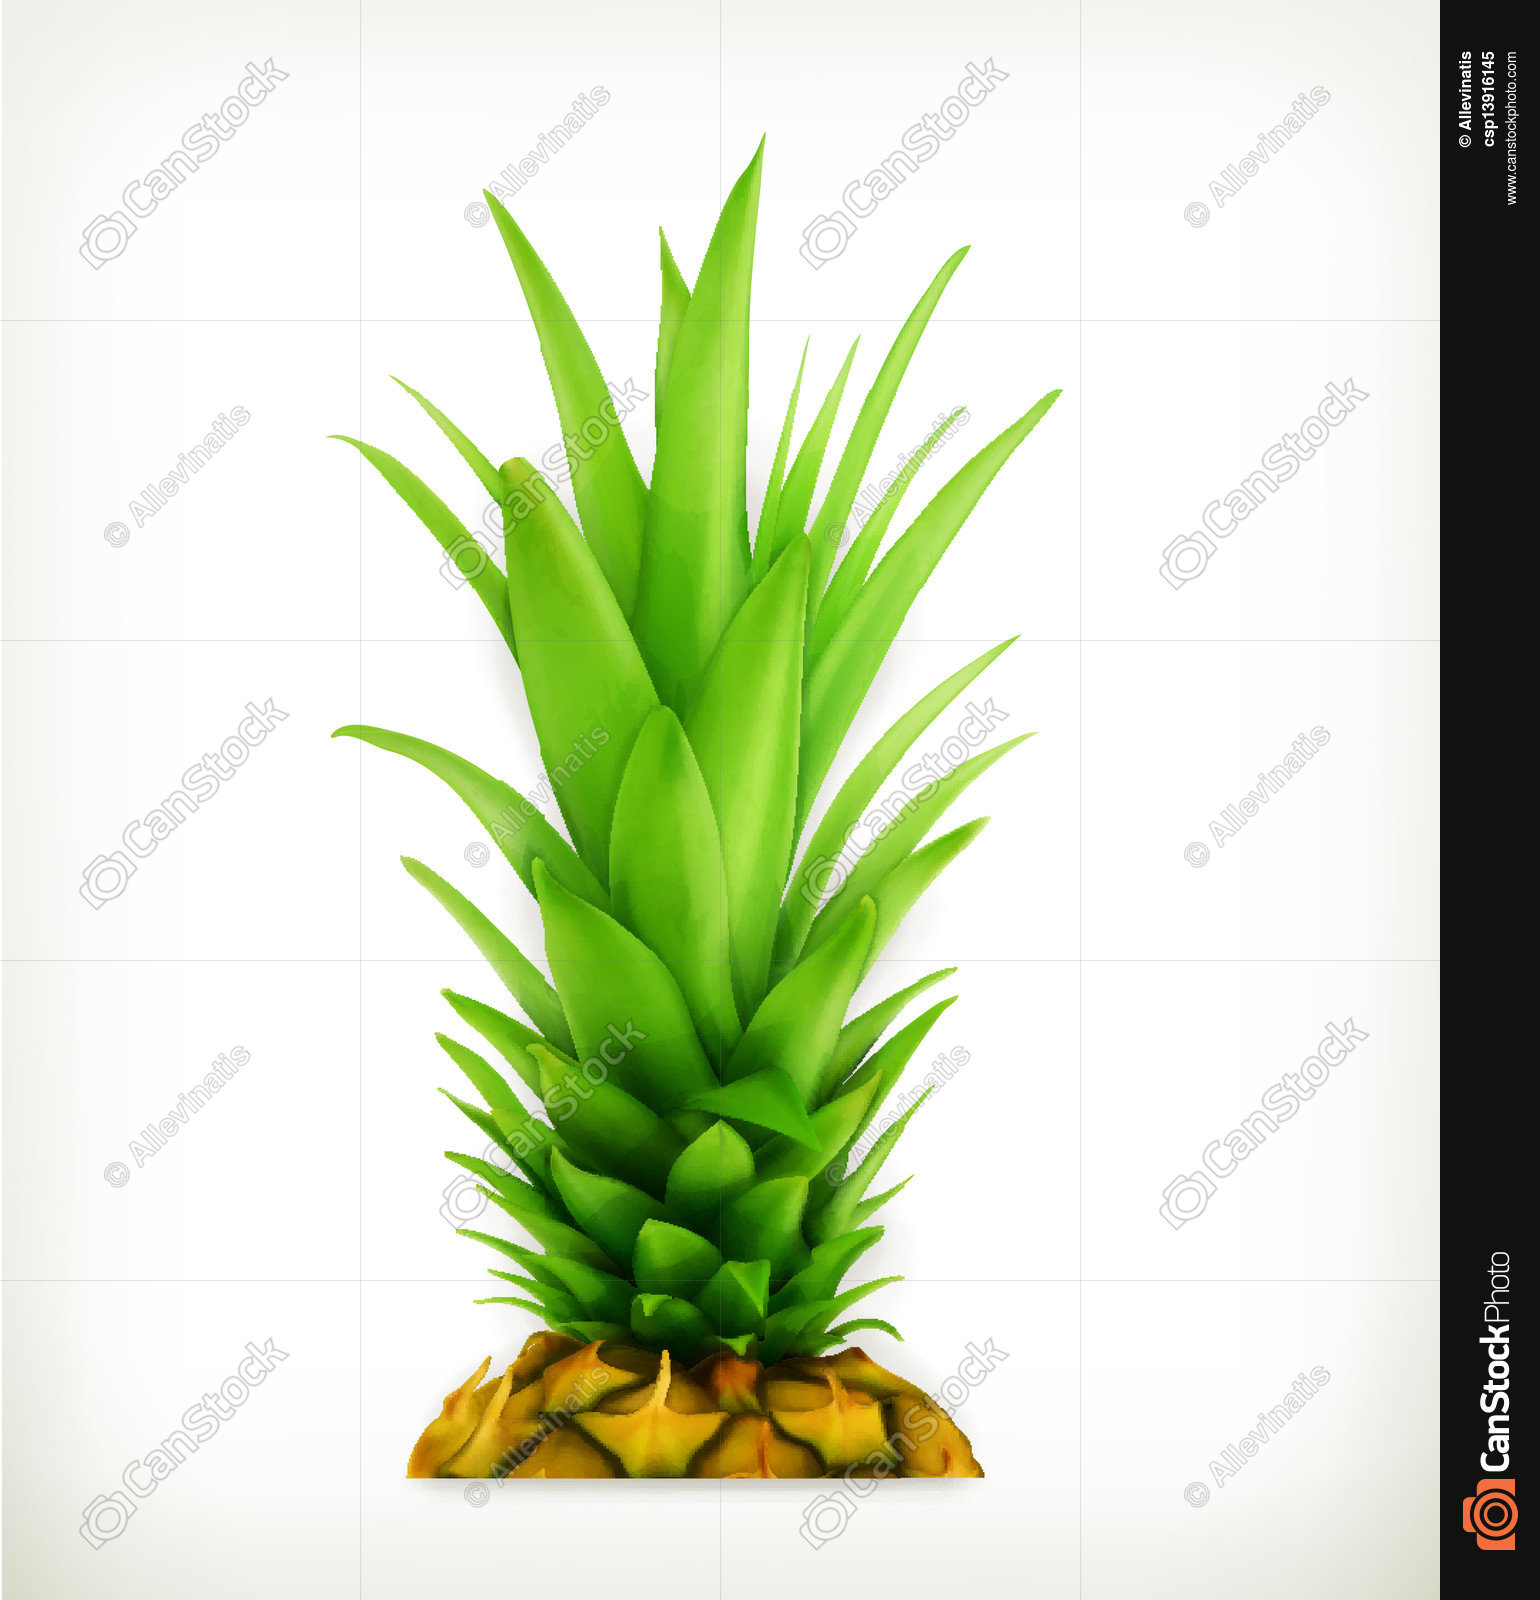 Pineapple top vector eps vector - Search Clip Art, Illustration ...